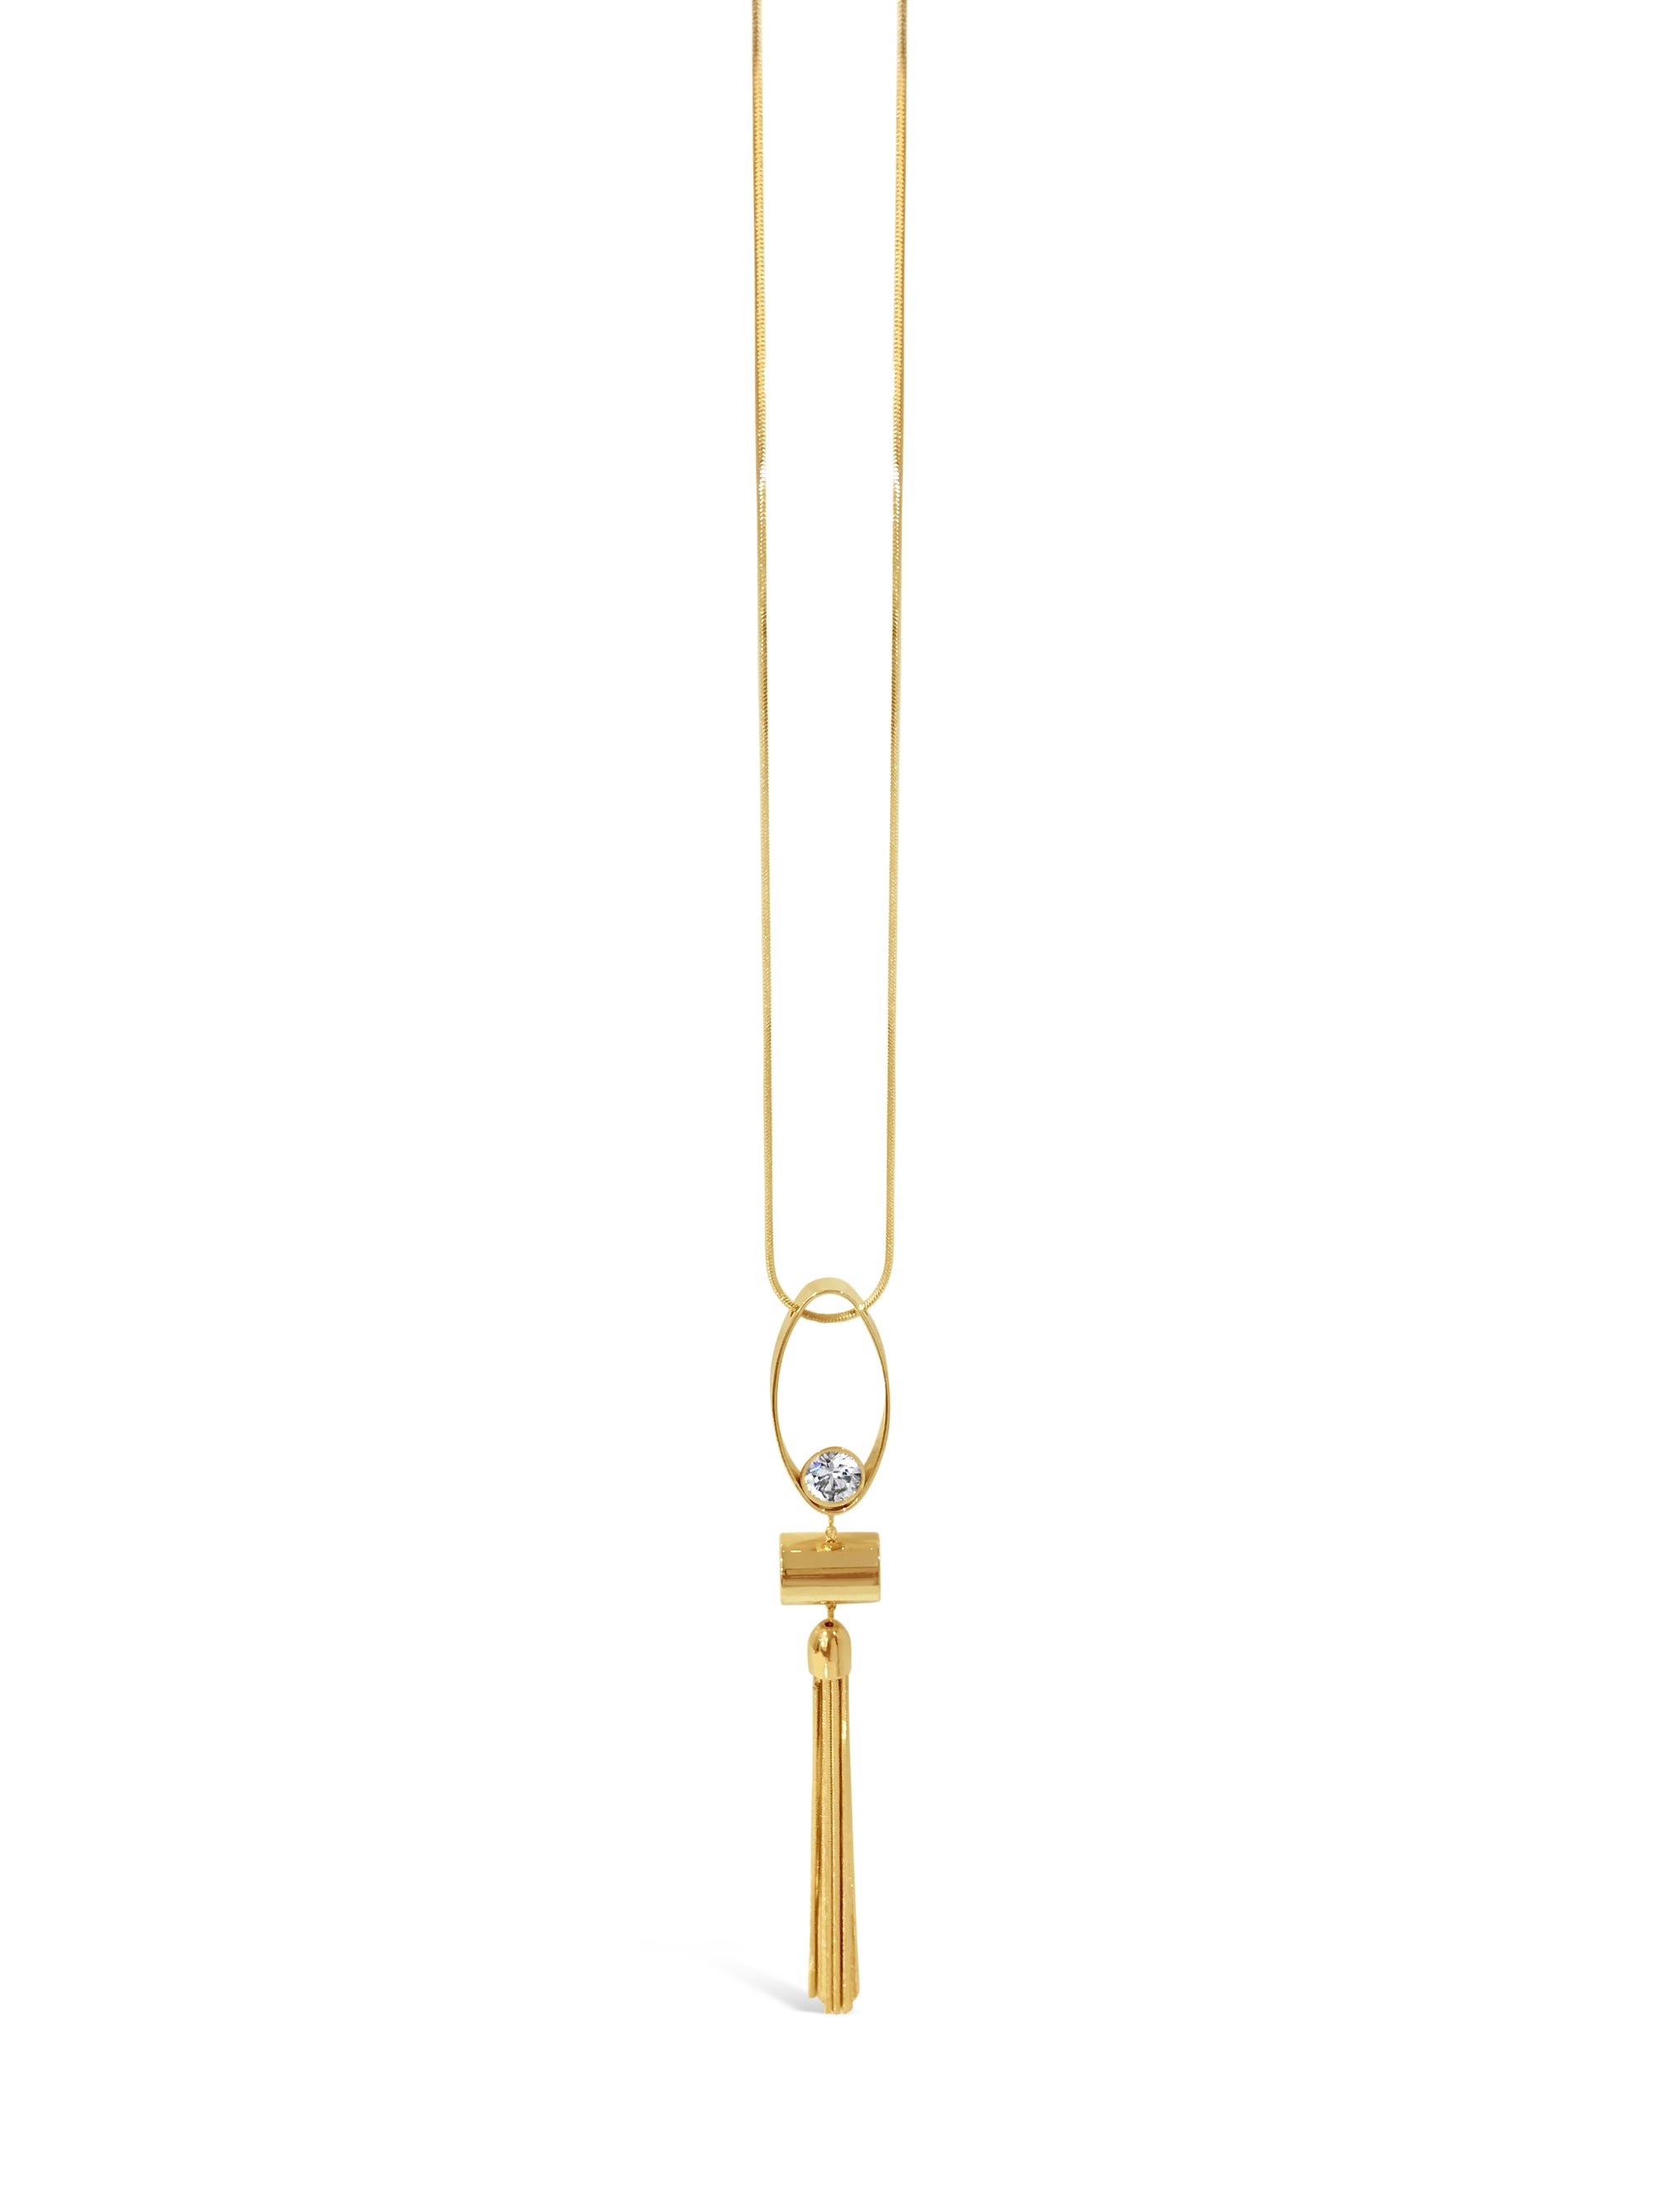 Absolute Jewellery Necklace Gold 28"